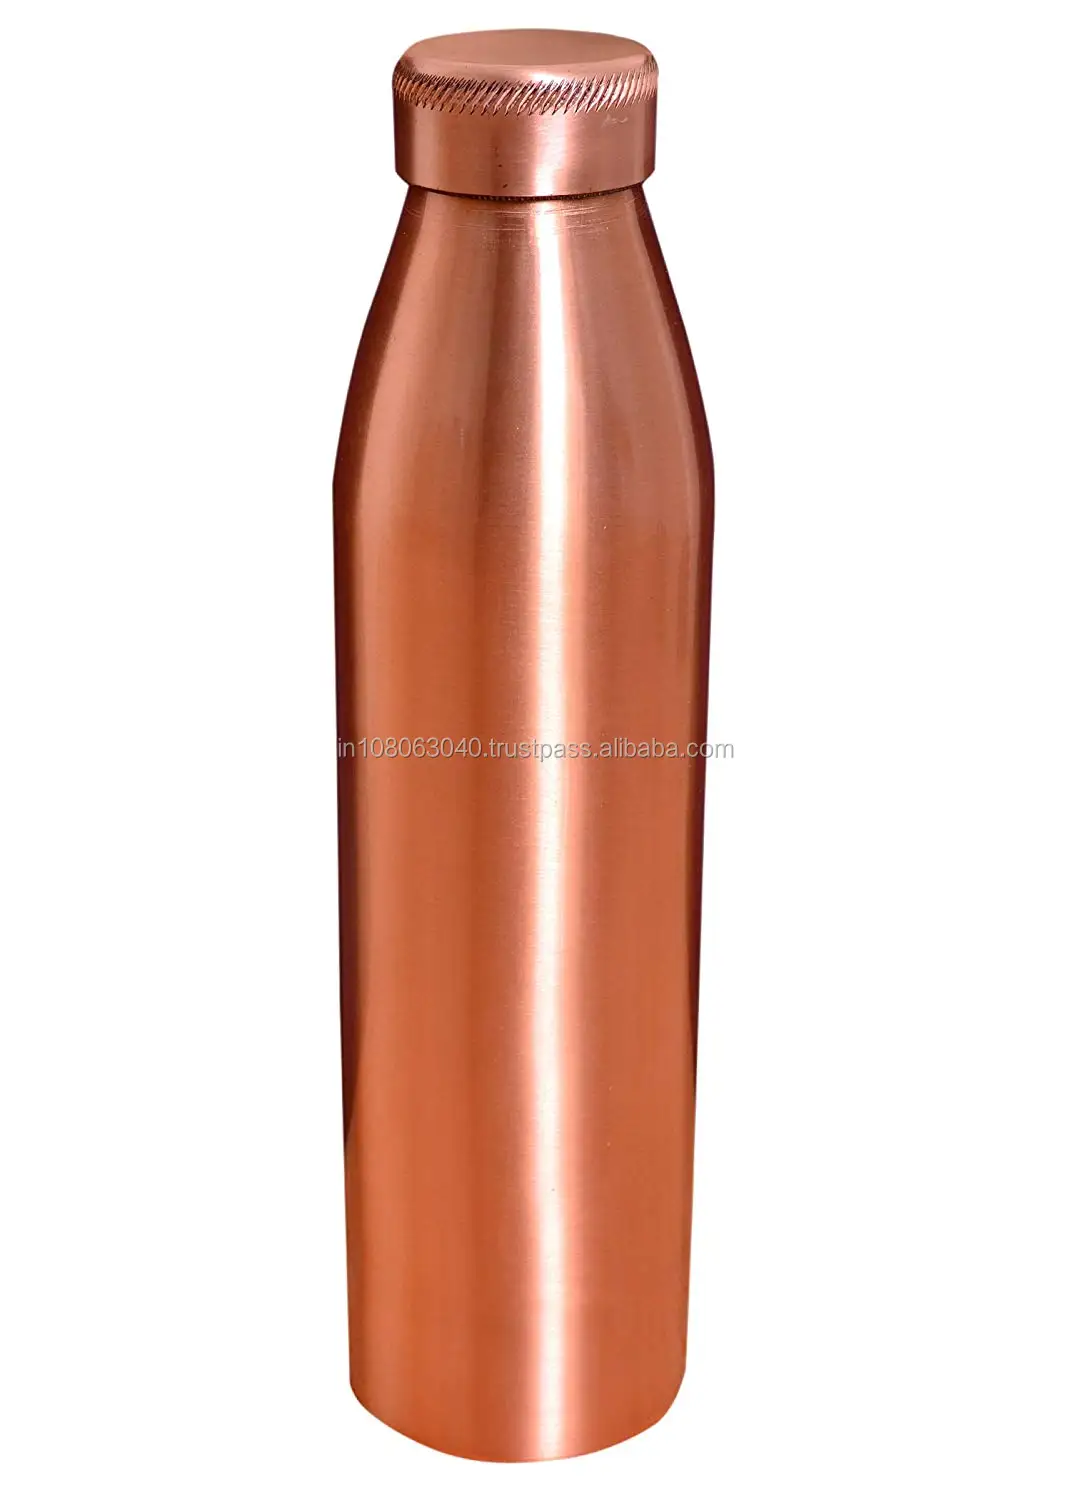 Seam Less Copper Water Bottle 1 litre For Ayurveda Health Benefit 